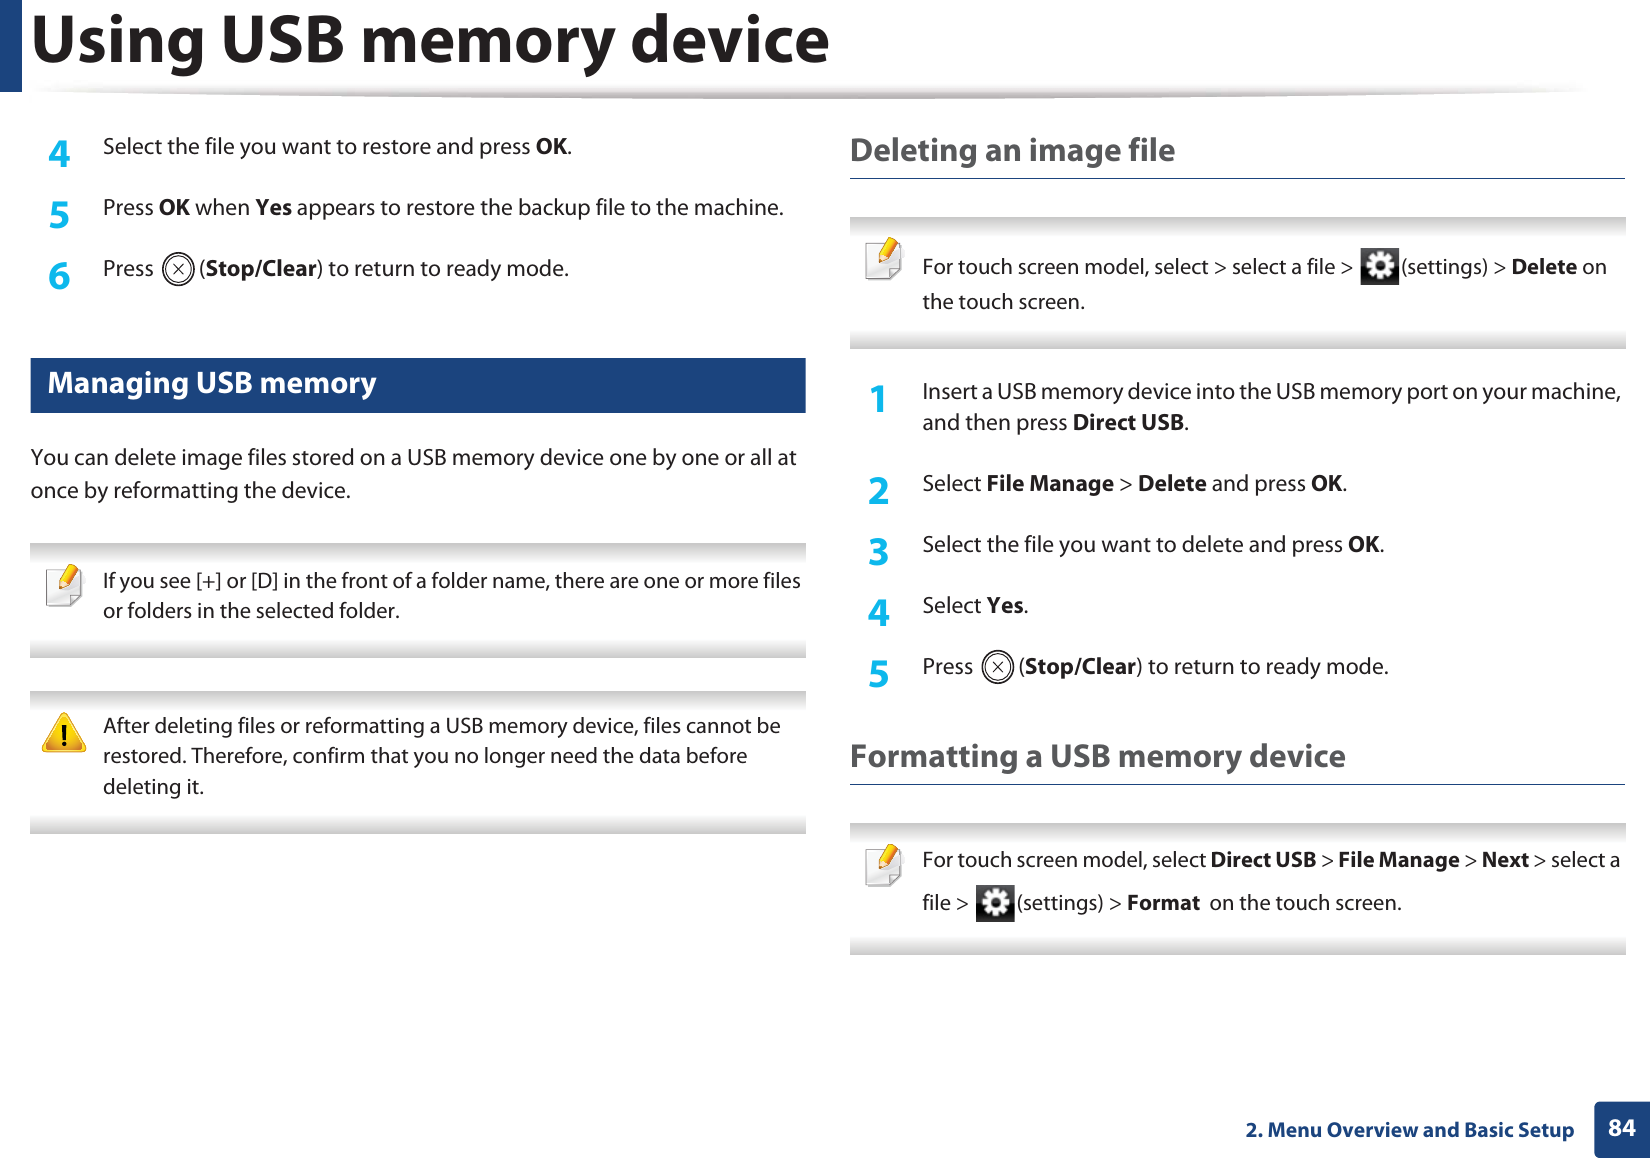 Using USB memory device842. Menu Overview and Basic Setup4  Select the file you want to restore and press OK.5  Press OK when Yes appears to restore the backup file to the machine.6  Press (Stop/Clear) to return to ready mode.29 Managing USB memoryYou can delete image files stored on a USB memory device one by one or all at once by reformatting the device. If you see [+] or [D] in the front of a folder name, there are one or more files or folders in the selected folder.  After deleting files or reformatting a USB memory device, files cannot be restored. Therefore, confirm that you no longer need the data before deleting it. Deleting an image file For touch screen model, select &gt; select a file &gt;  (settings) &gt; Delete on the touch screen. 1Insert a USB memory device into the USB memory port on your machine, and then press Direct USB.2  Select File Manage &gt; Delete and press OK.3  Select the file you want to delete and press OK.4  Select Yes.5  Press (Stop/Clear) to return to ready mode.Formatting a USB memory device For touch screen model, select Direct USB &gt; File Manage &gt; Next &gt; select a file &gt;  (settings) &gt; Format  on the touch screen. 